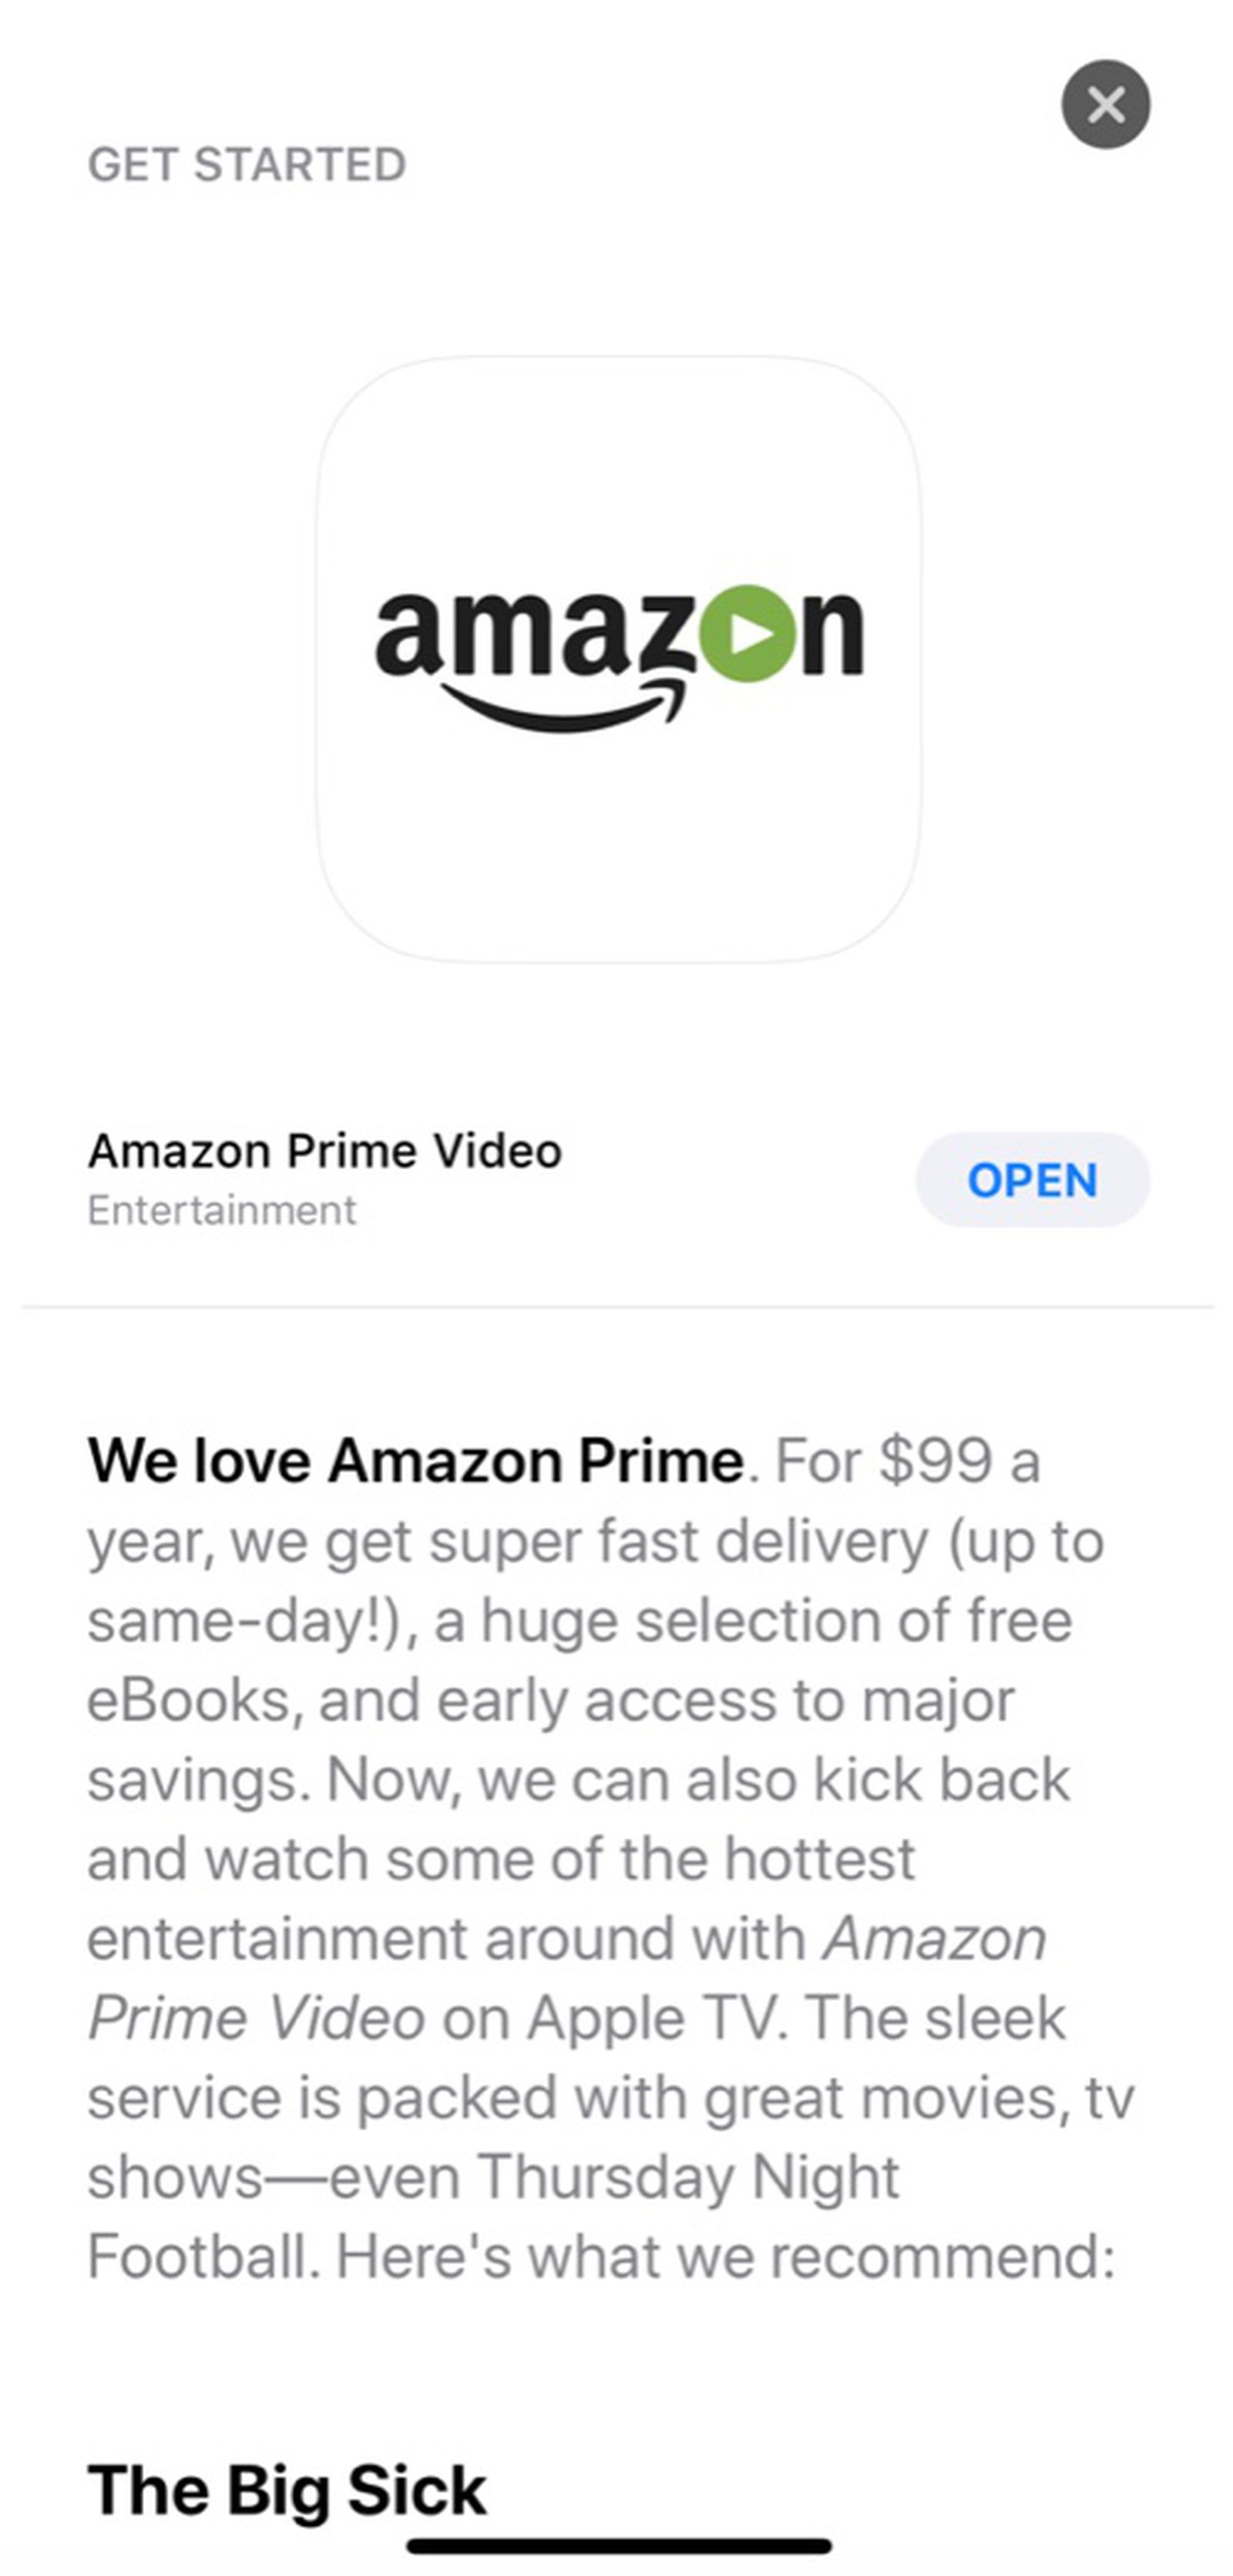 Apple Accidentally Promotes Amazon Prime Video for Apple TV in App Store, Be Imminent [Updated] - MacRumors